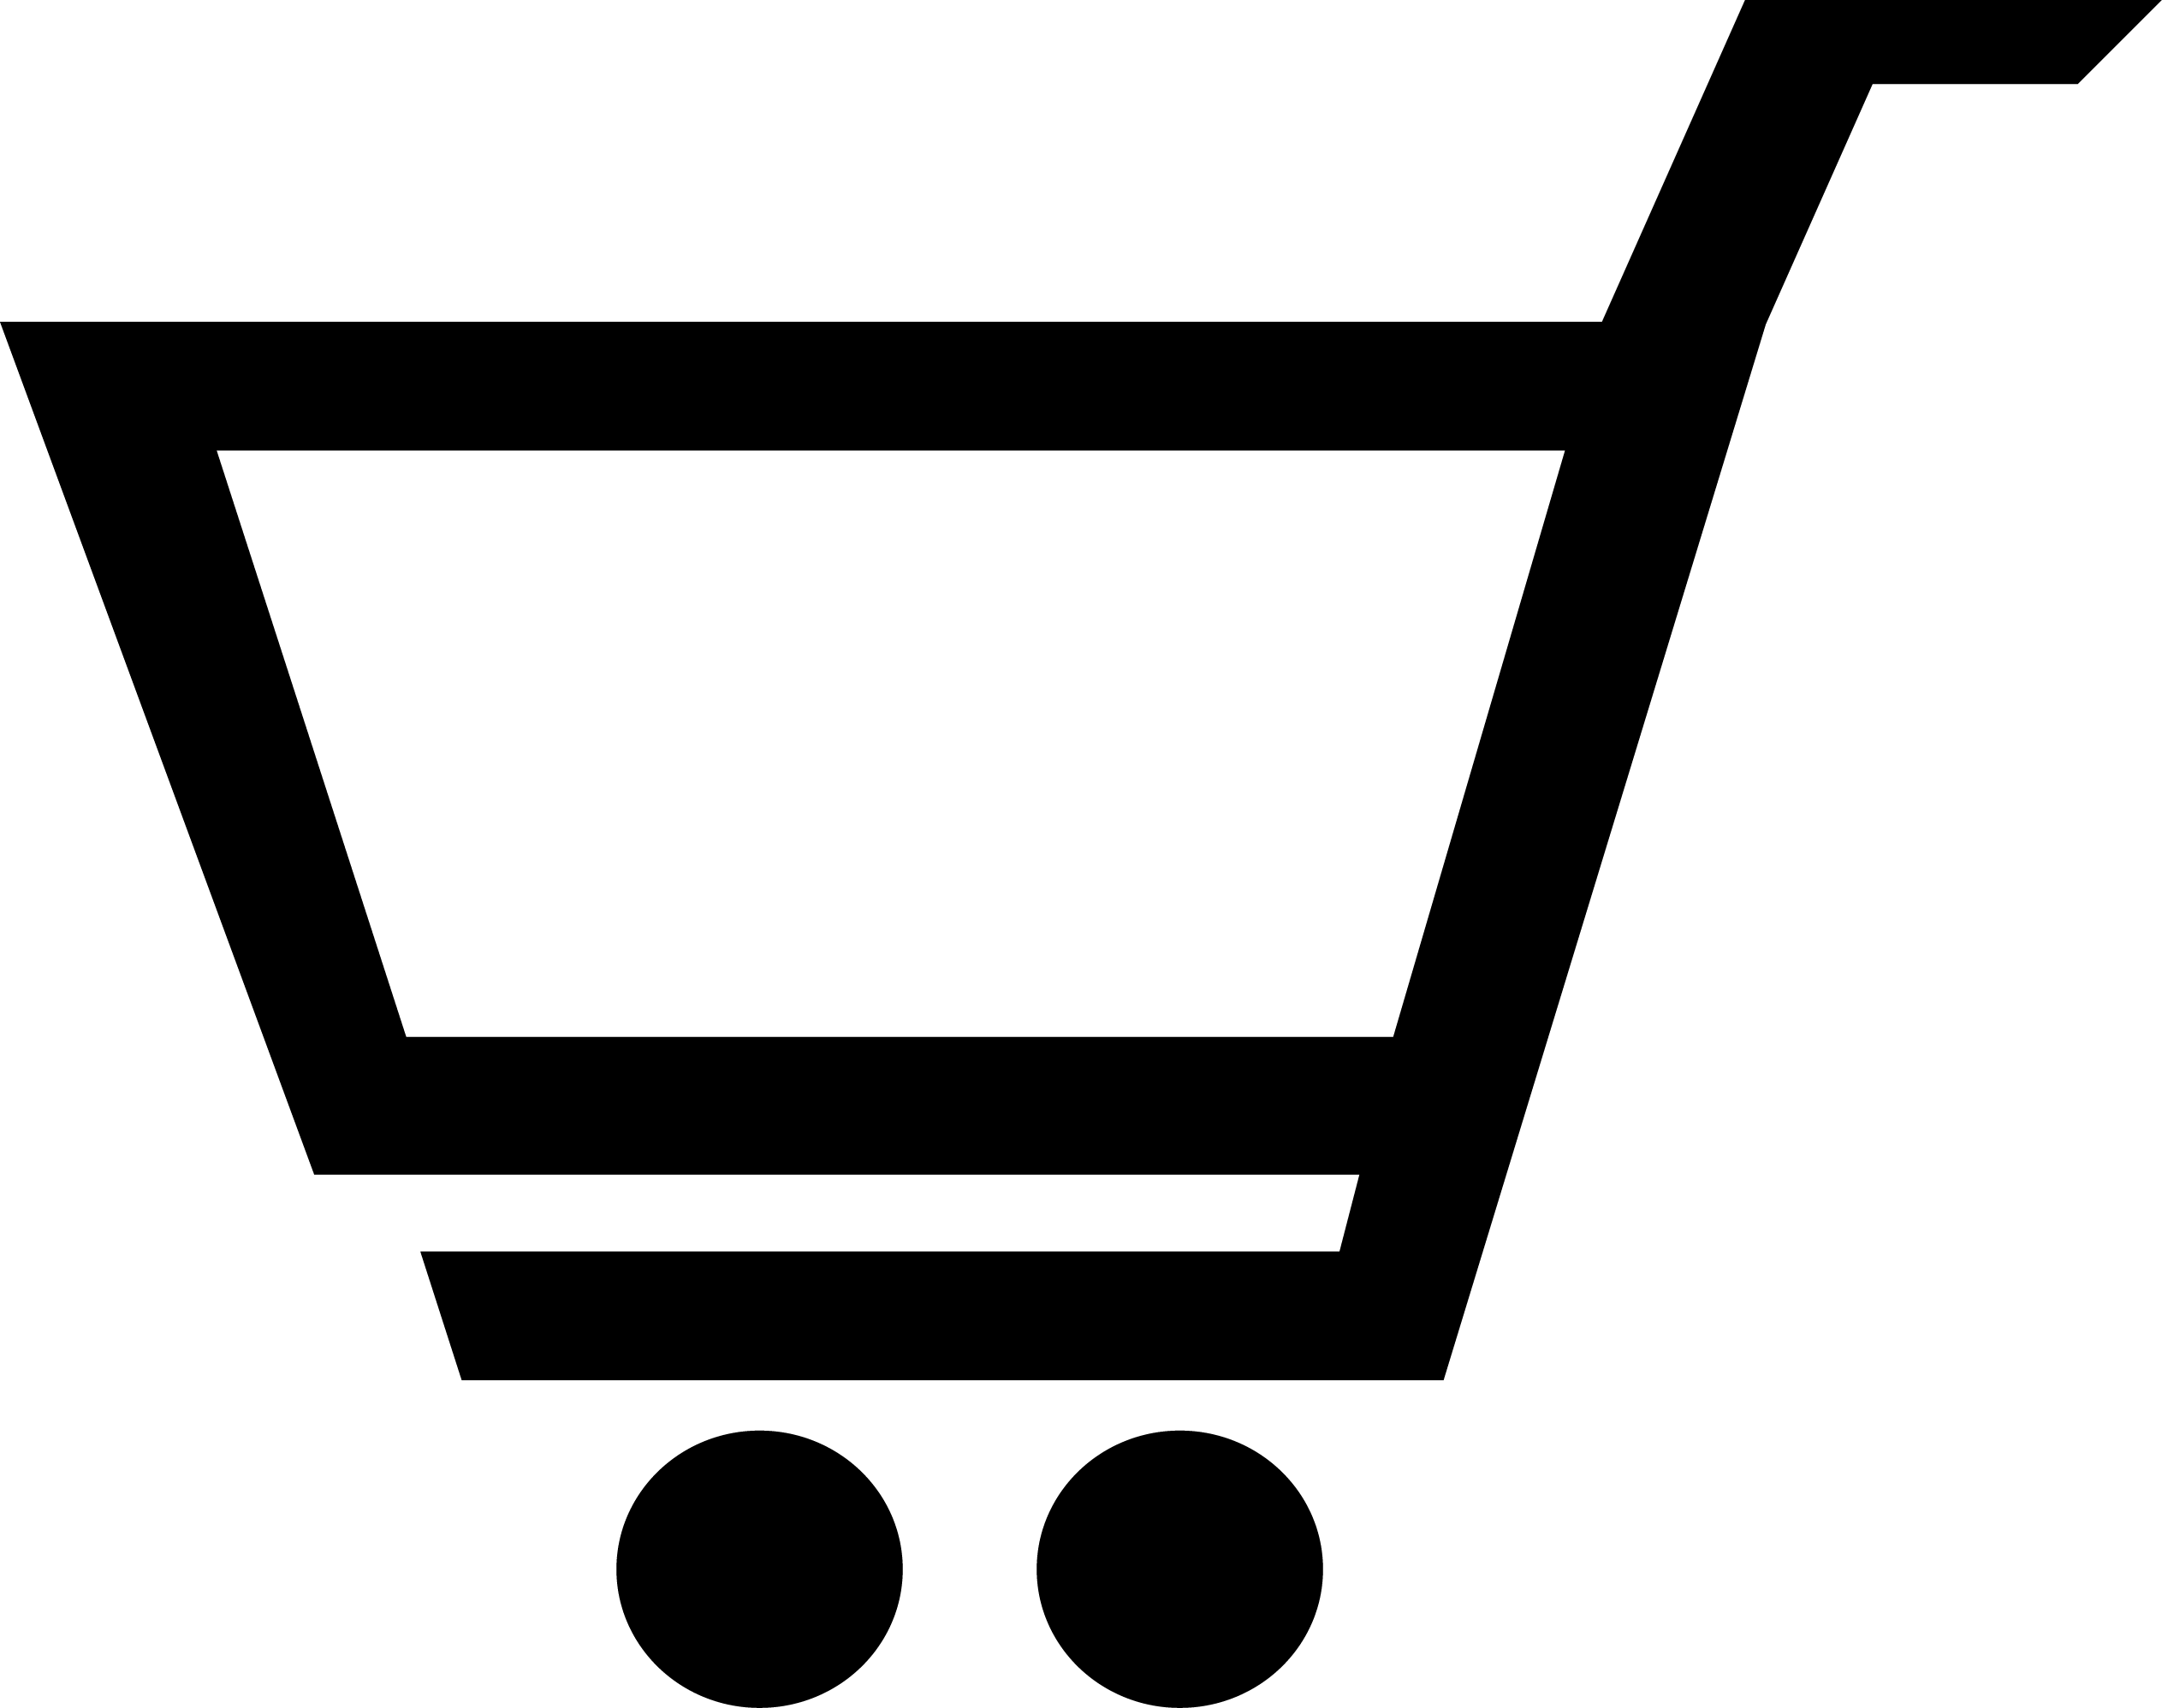 Trolley Clipart - Trolley Clipart